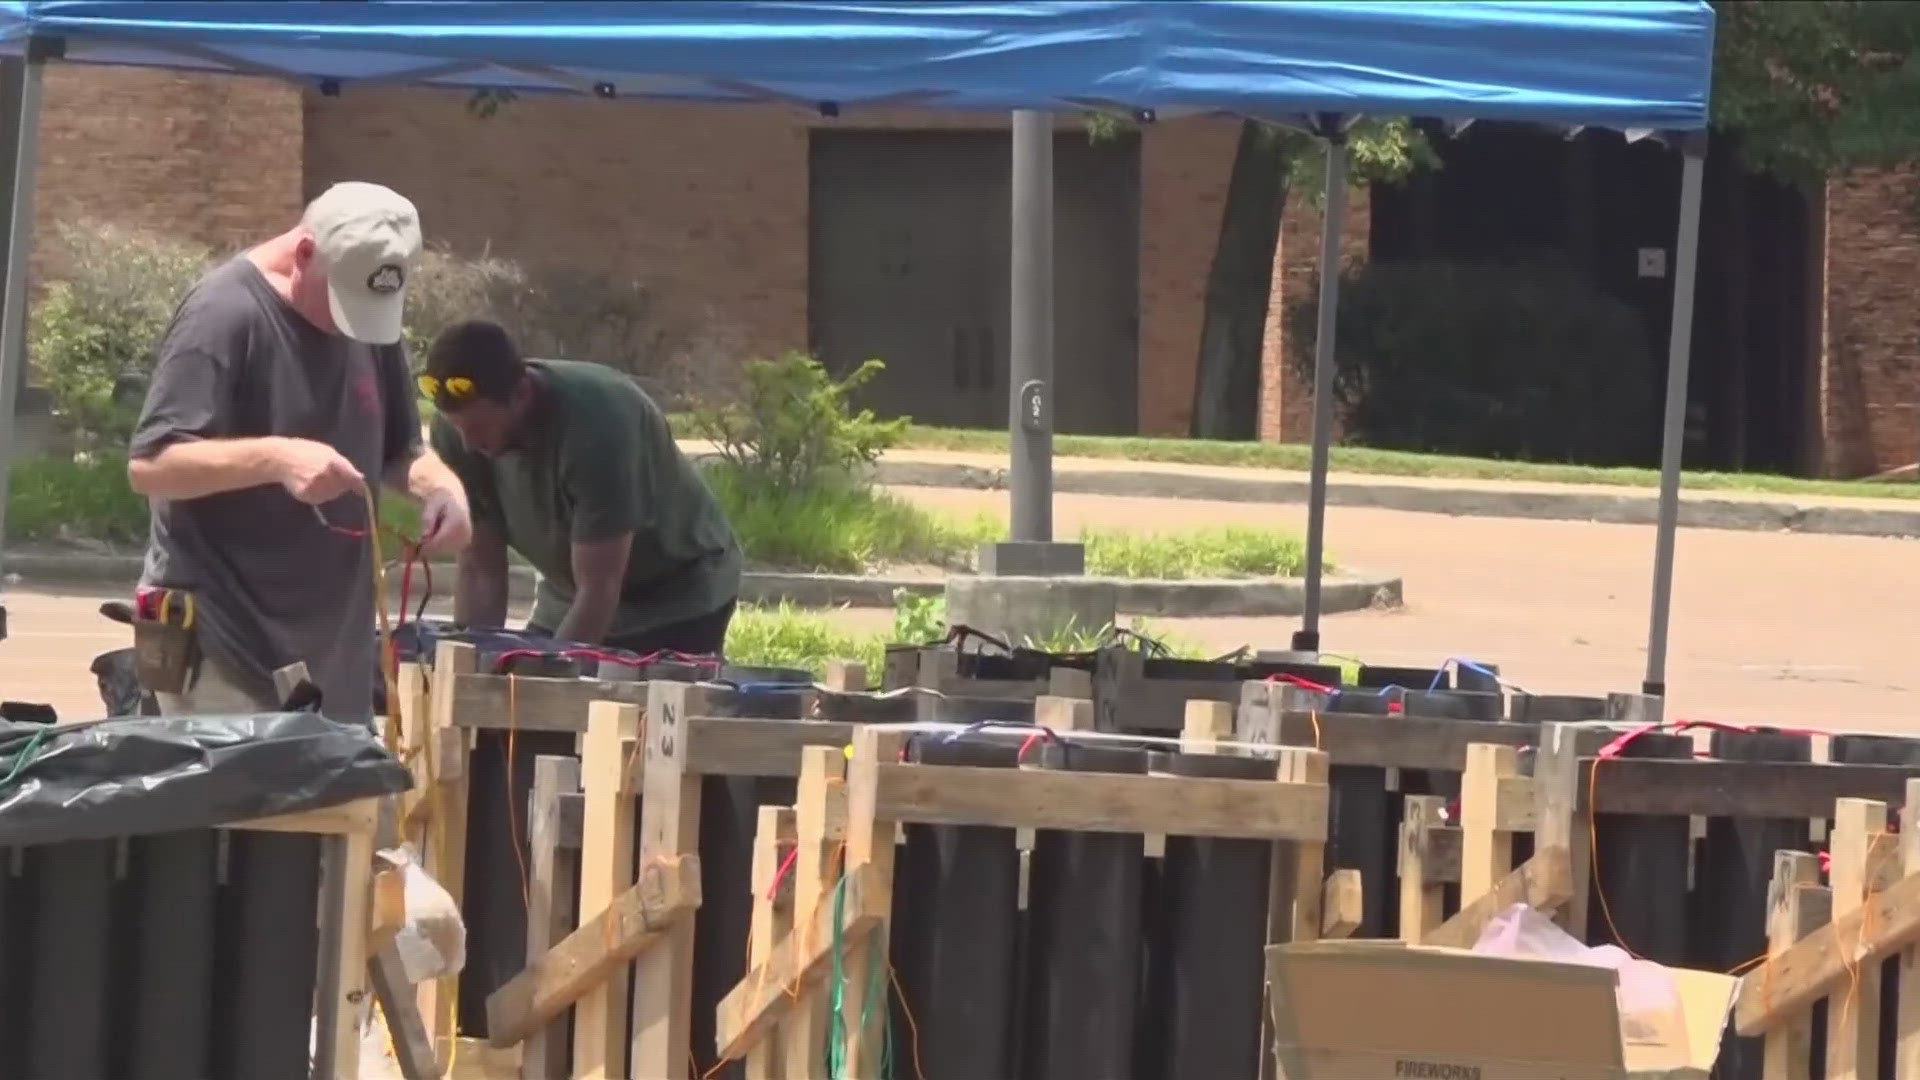 The fireworks are stocked for Germantown's annual "Fireworks Extravanagnza" an event which organizers say could draw as many as 8,000 people.